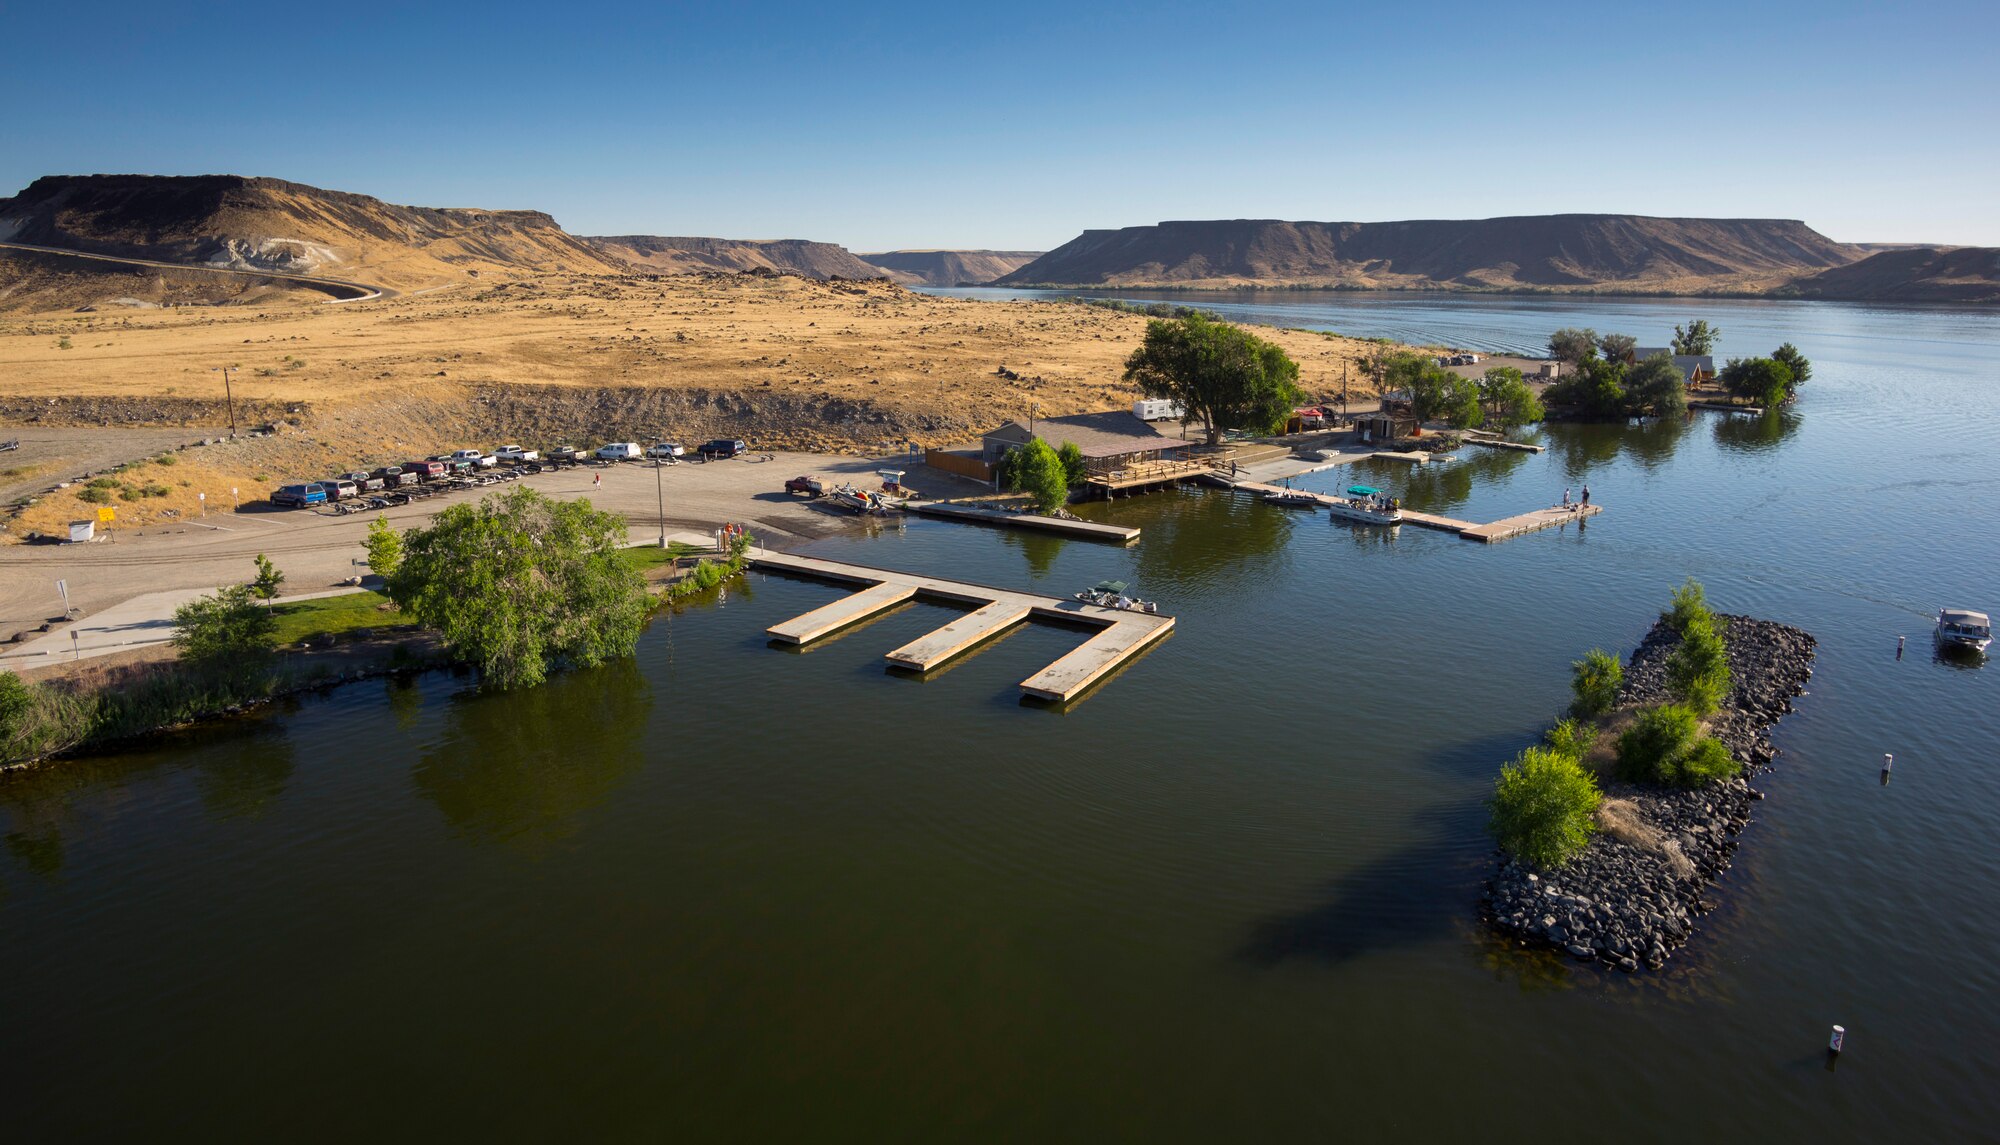 The Air Force Marina at C.J. Strike Dam, Idaho, offers rental equipment and facilities for Mountain Home Air Force Base airmen and their families. The marina operates from Memorial Day weekend through Labor Day weekend, Saturday, Sunday and holidays from 7 a.m. to 7 p.m. (Courtesy photo by Samuel Morse)